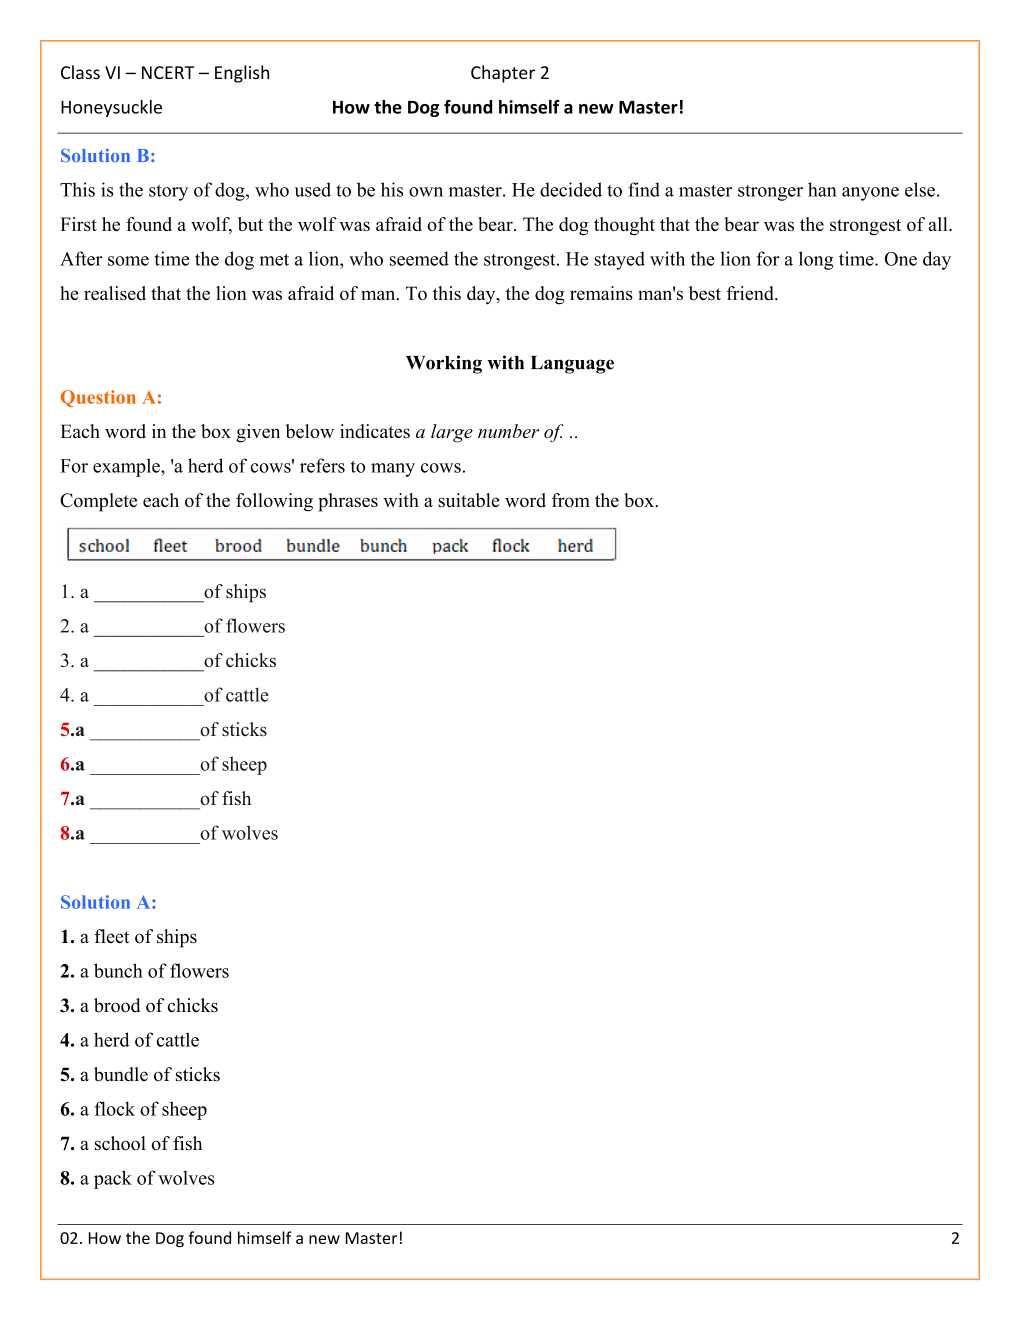 NCERT Solutions For Class 6 English Honeysuckle Chapter 2